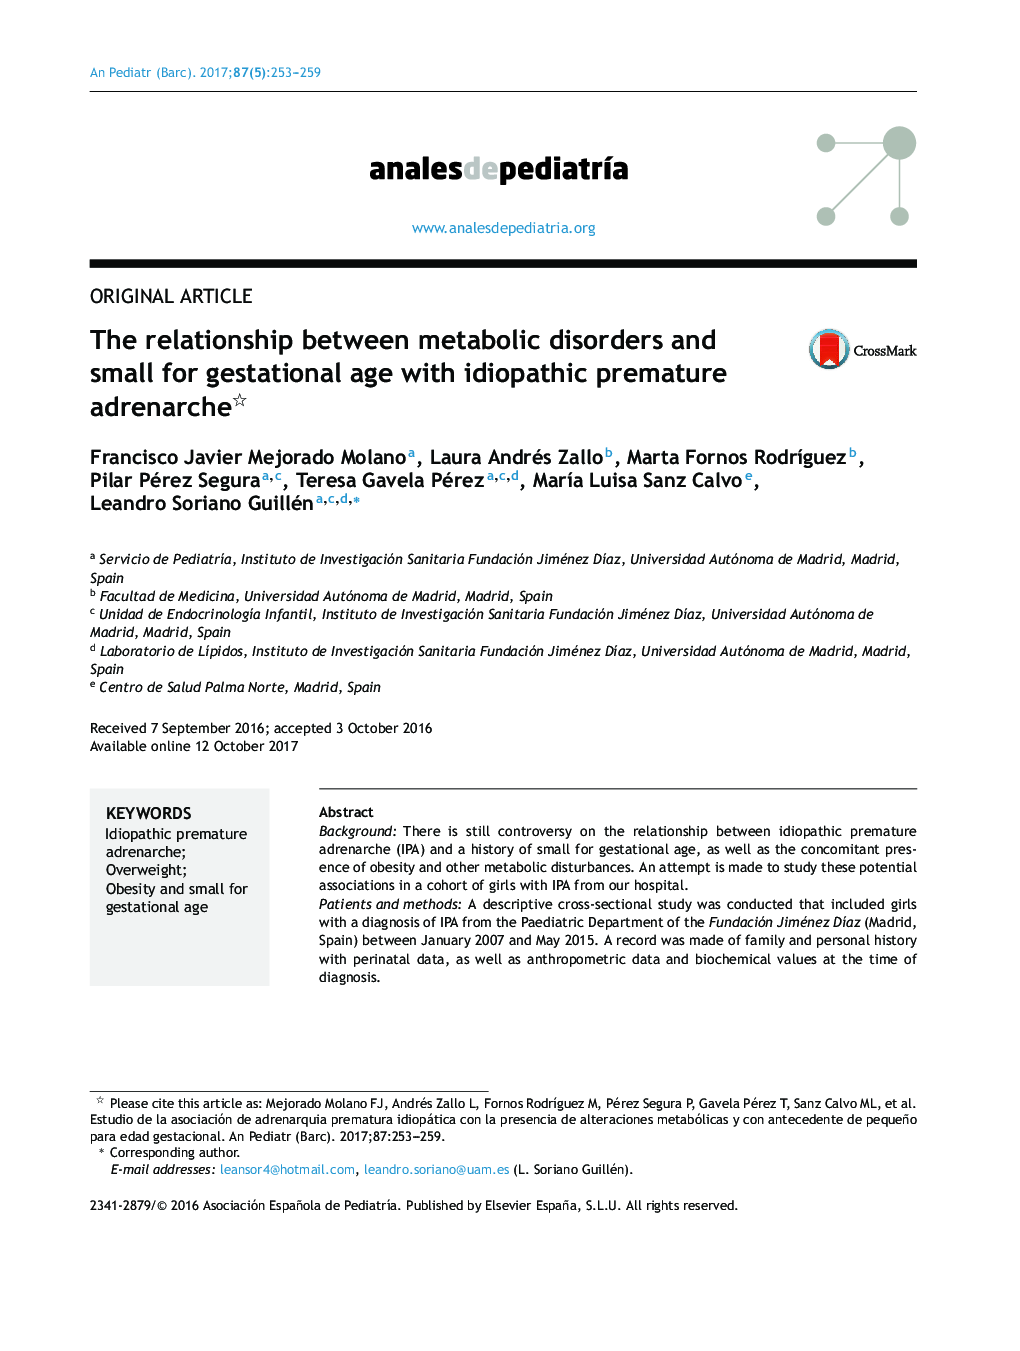 The relationship between metabolic disorders and small for gestational age with idiopathic premature adrenarche